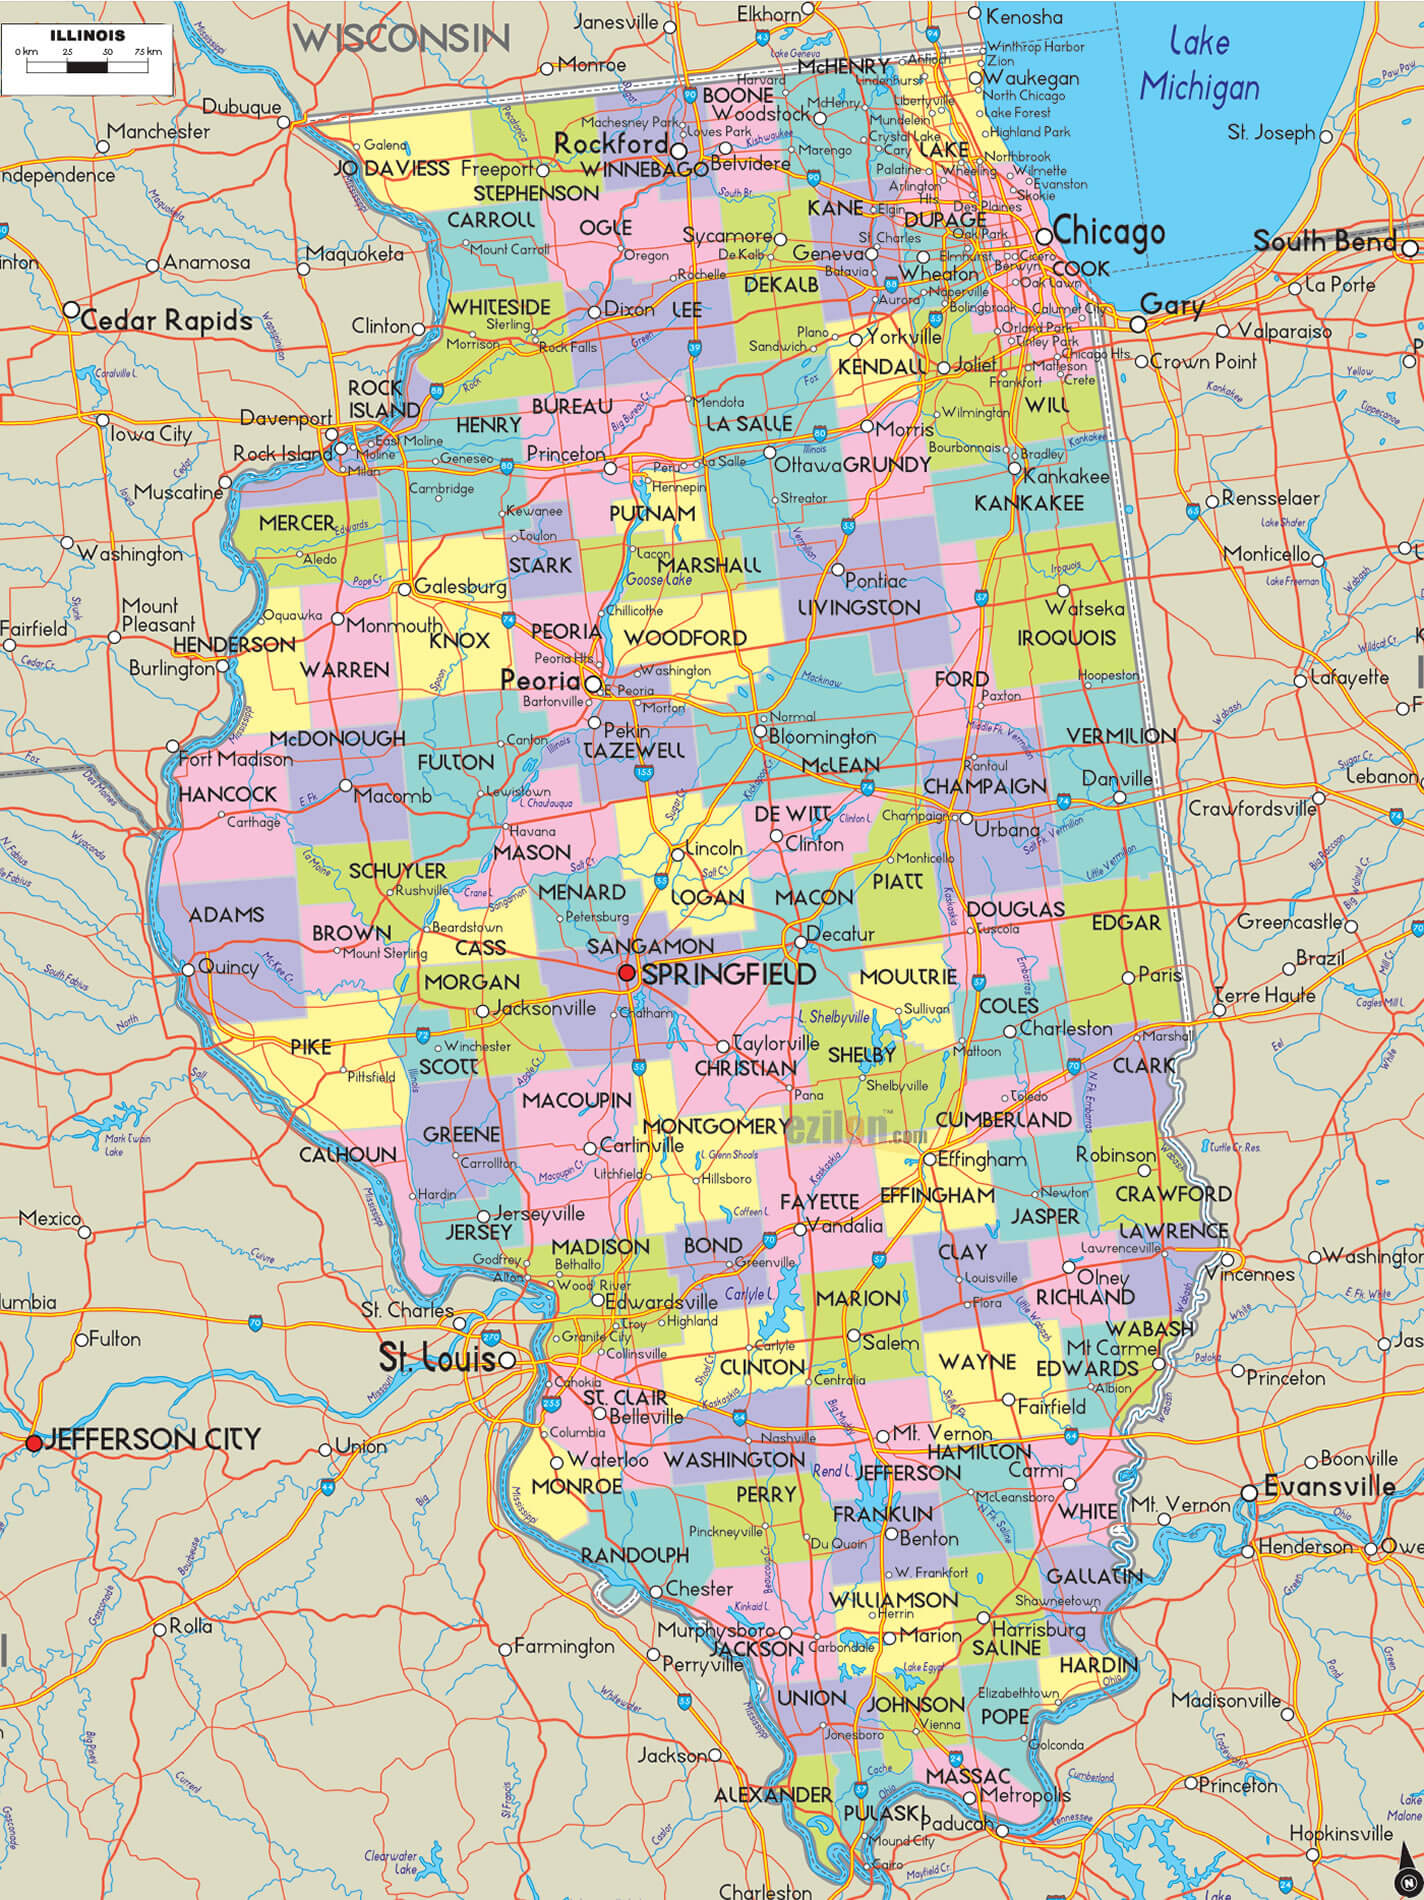 Illinois Counties Road Map USA